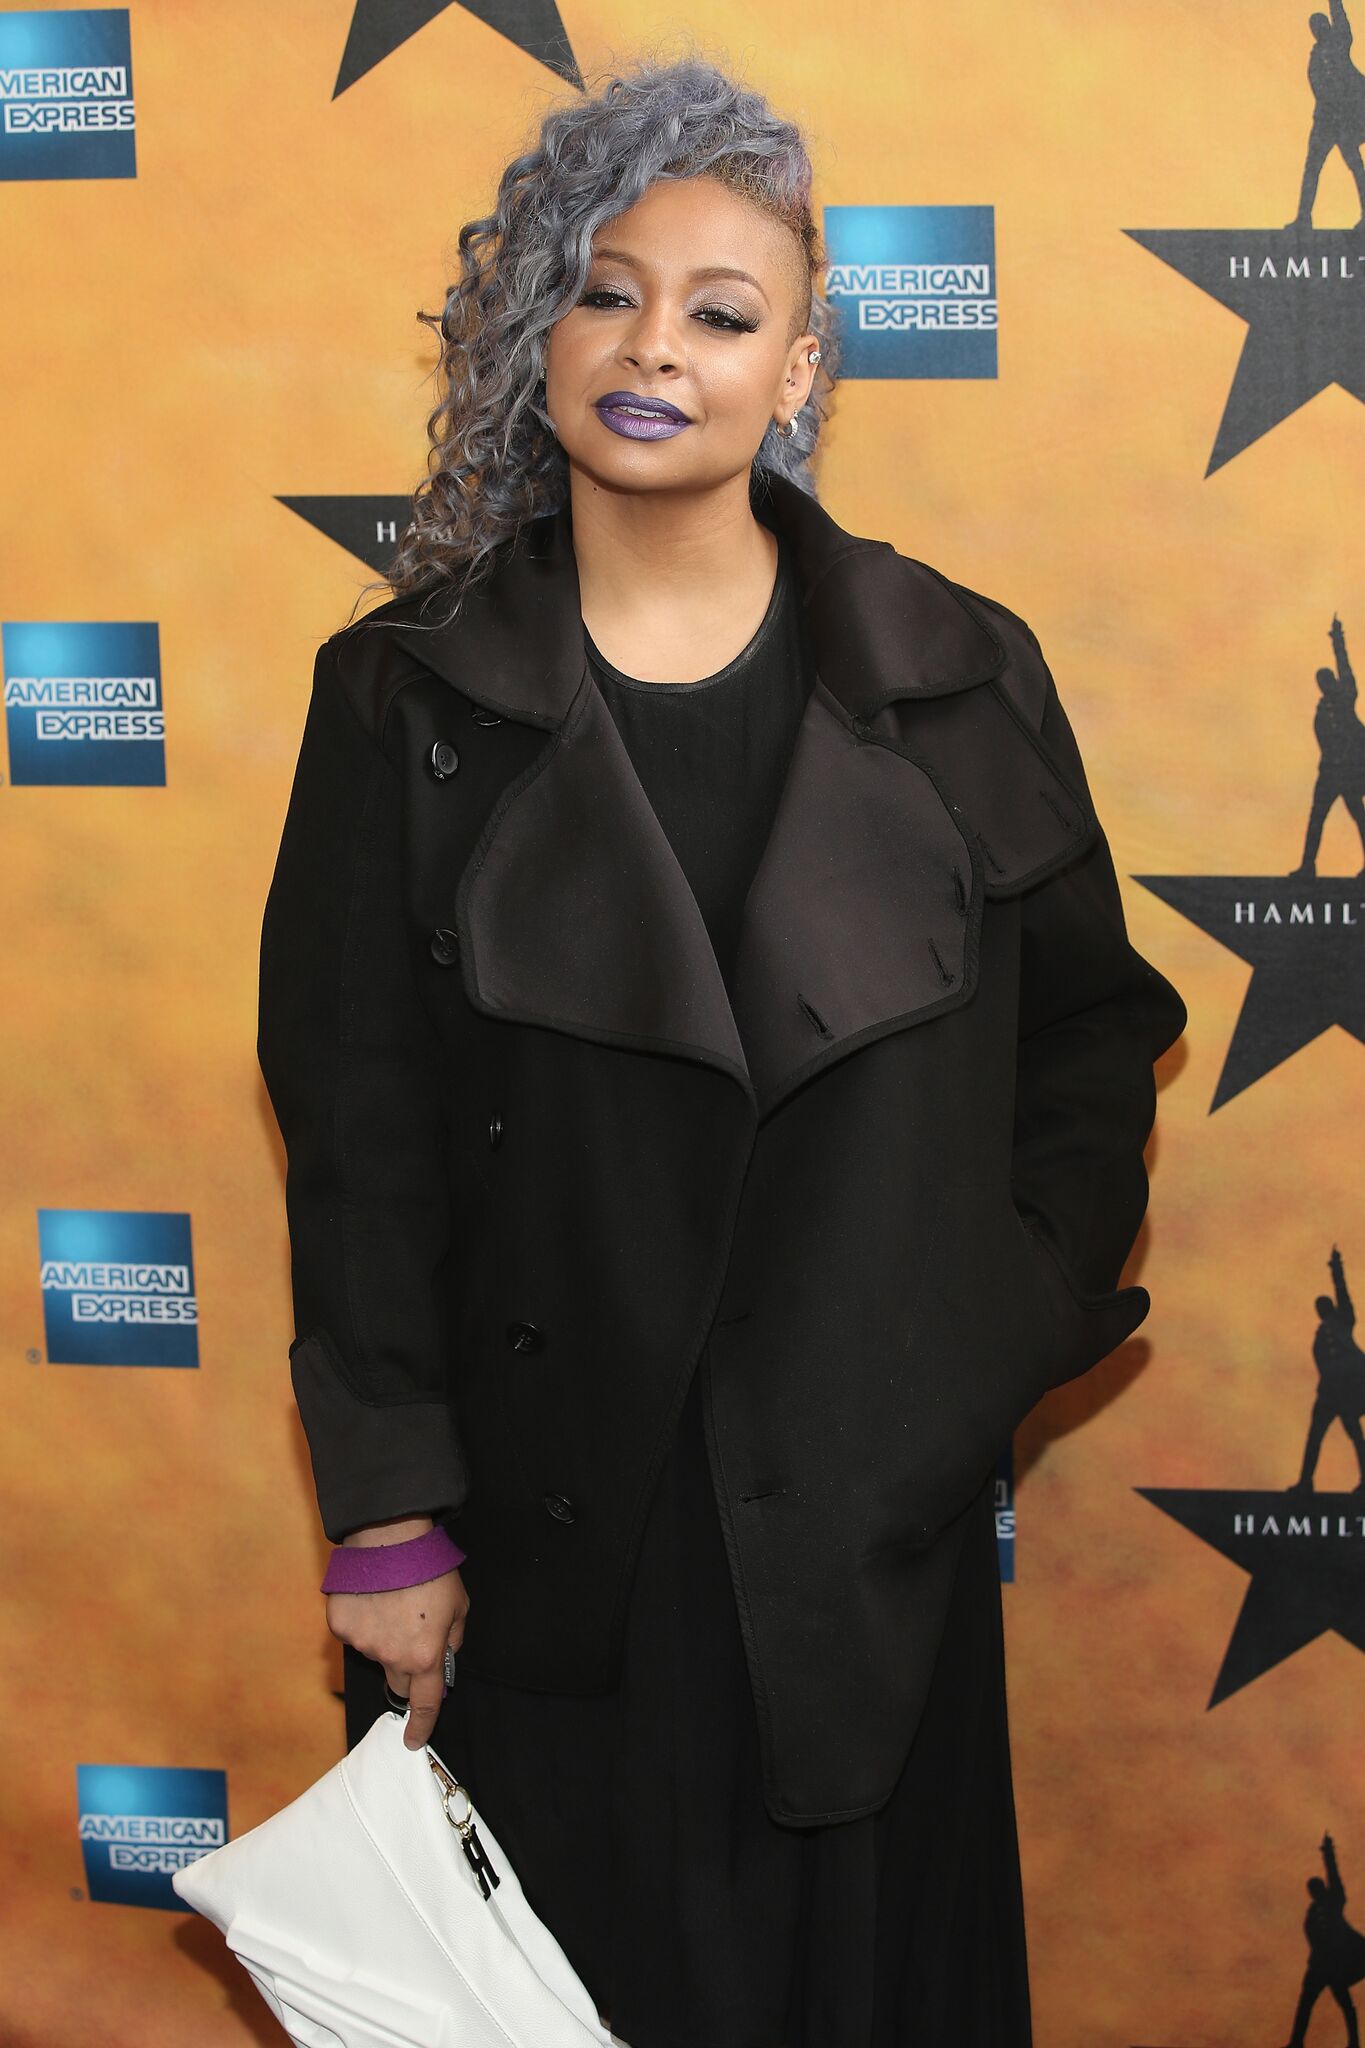 Raven-Symone attends "Hamilton" Broadway Opening Night at Richard Rodgers Theatre | Getty Images